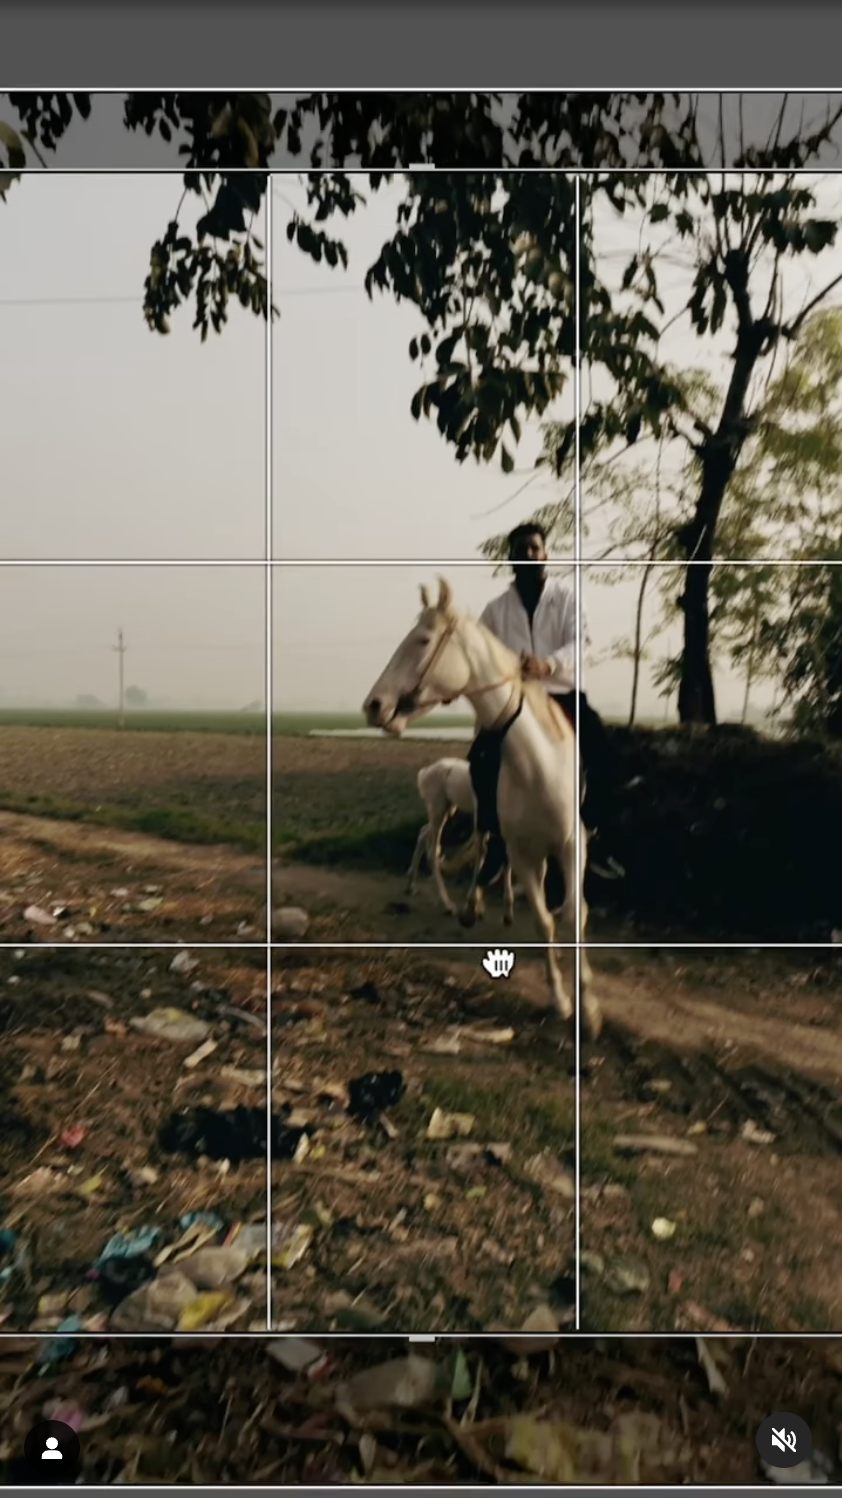 Screenshot of the One-Minute Workshop based on the work of Foam Talent 2024-2025 Aaryan Sinha. Photo shows a man riding a horse, the photo is being cropped.